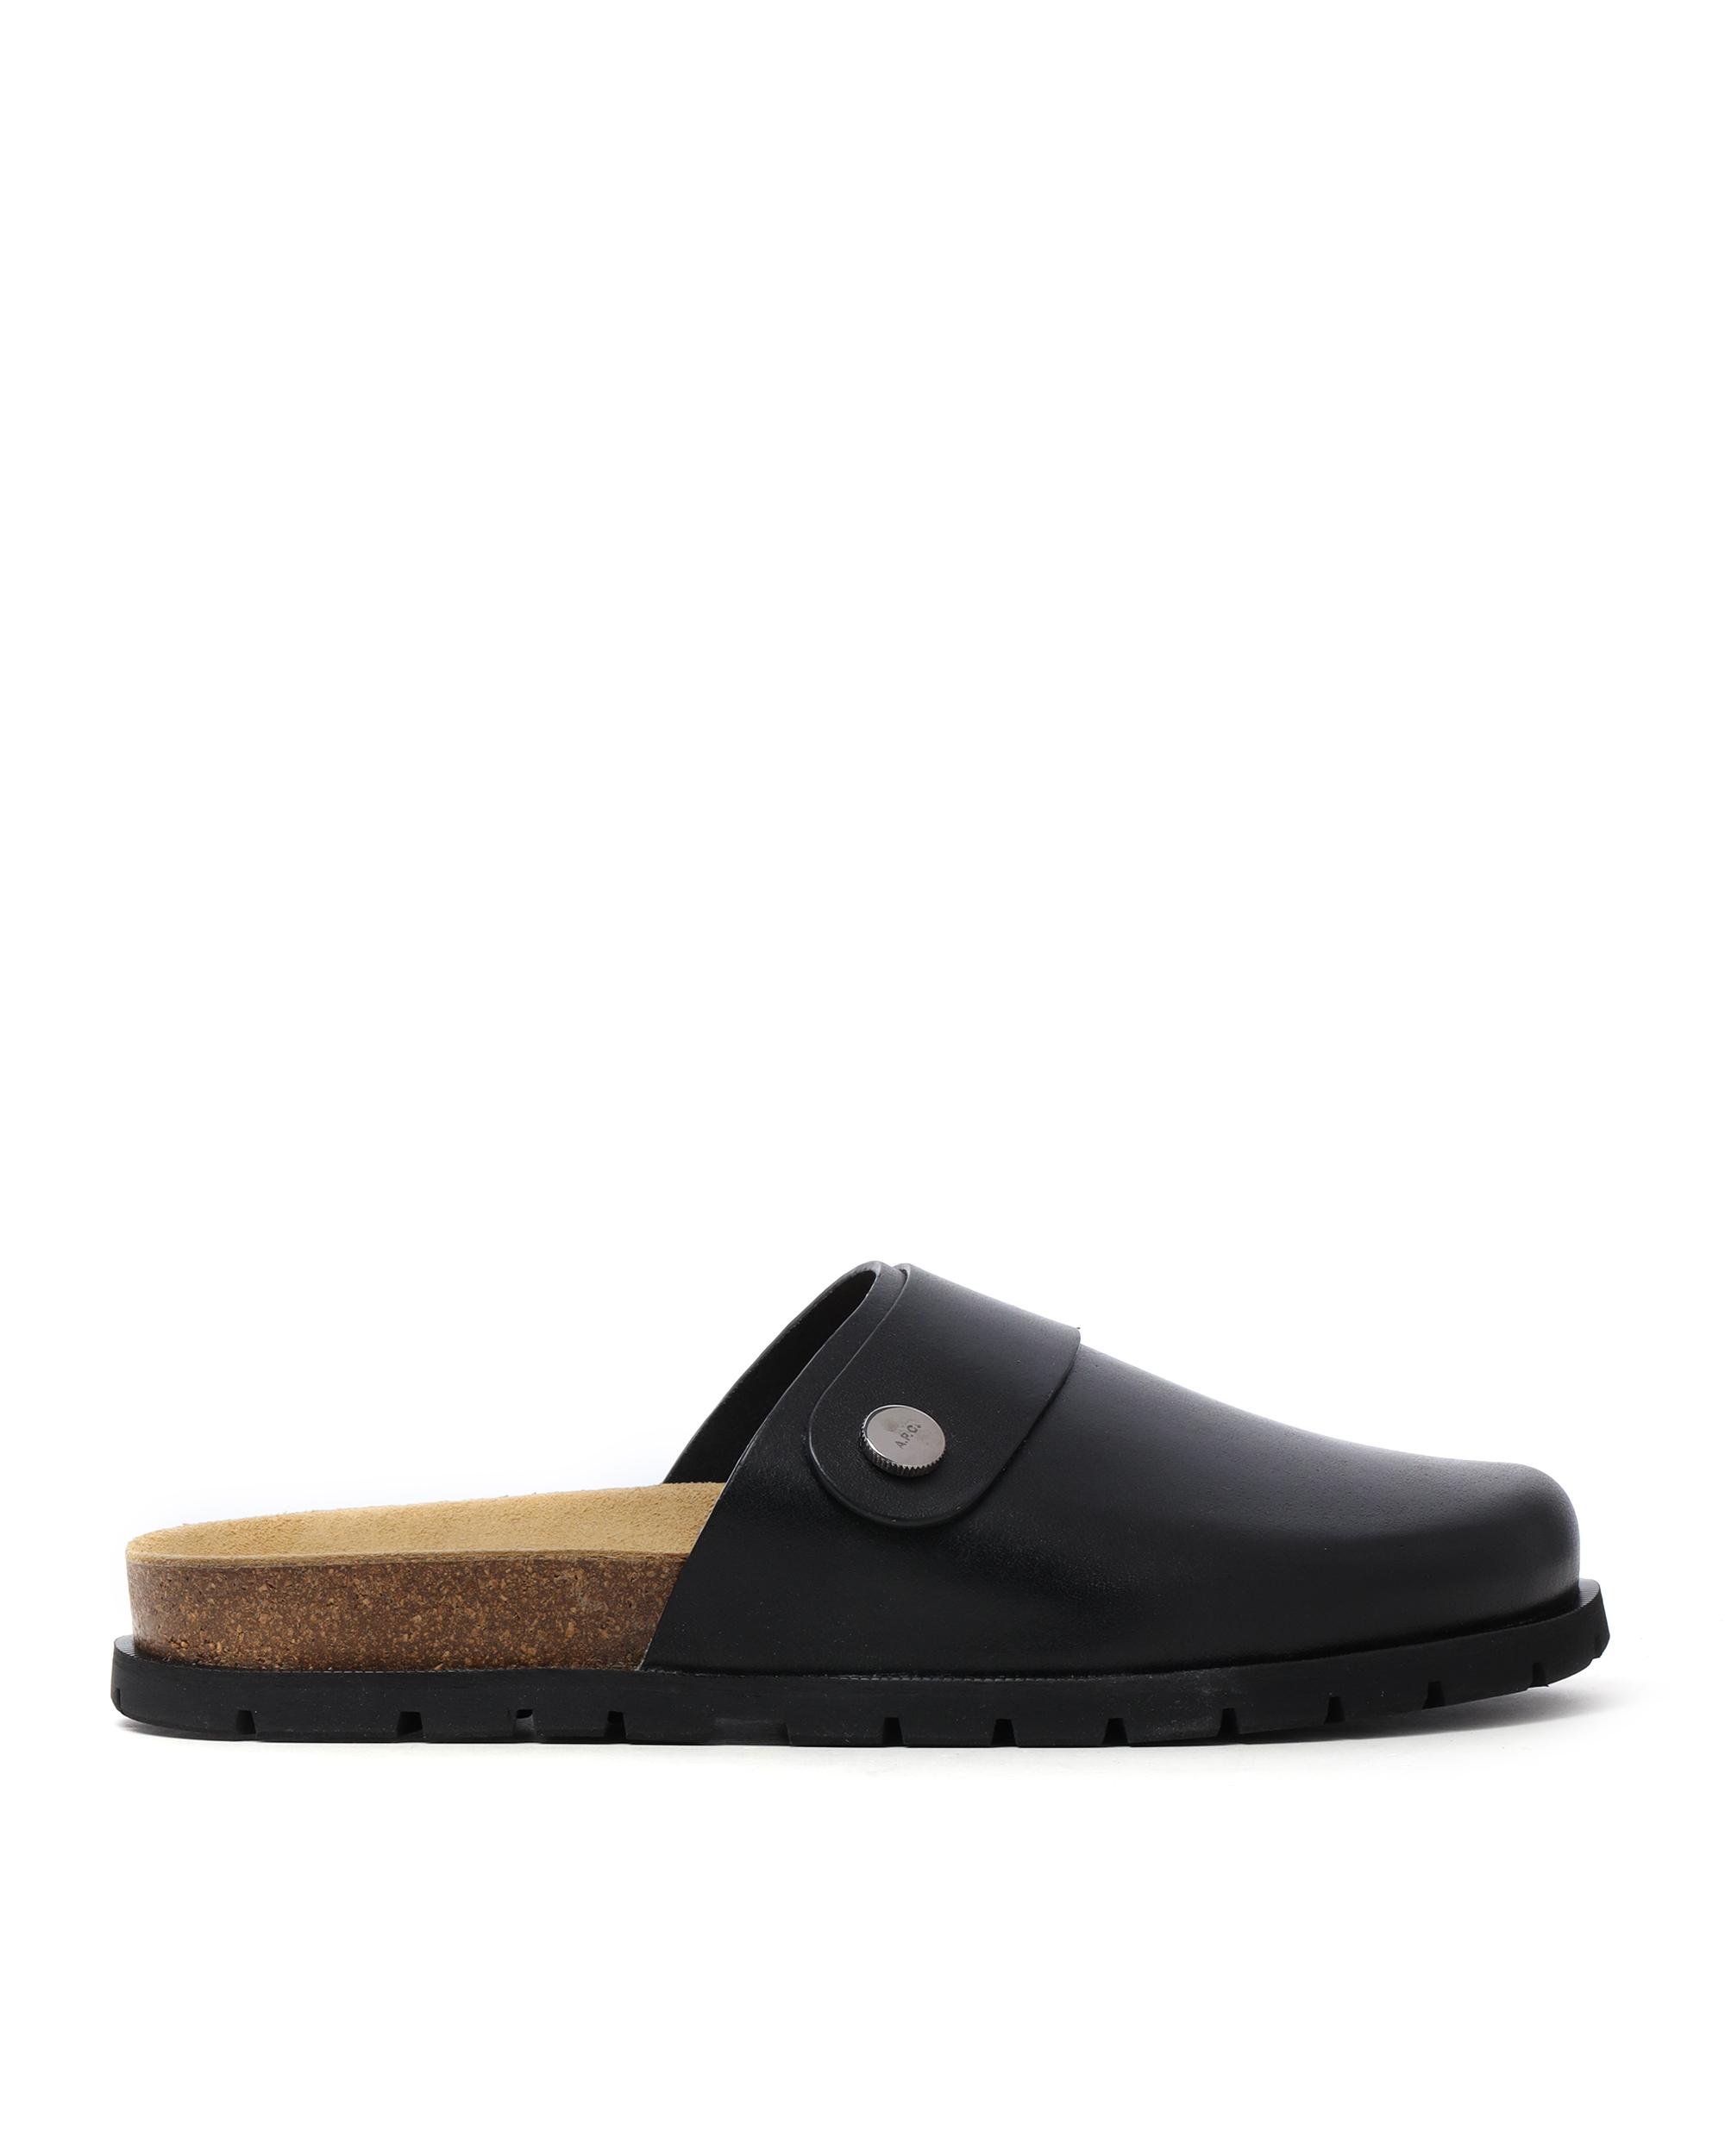 Slip-on sandals by A.P.C.